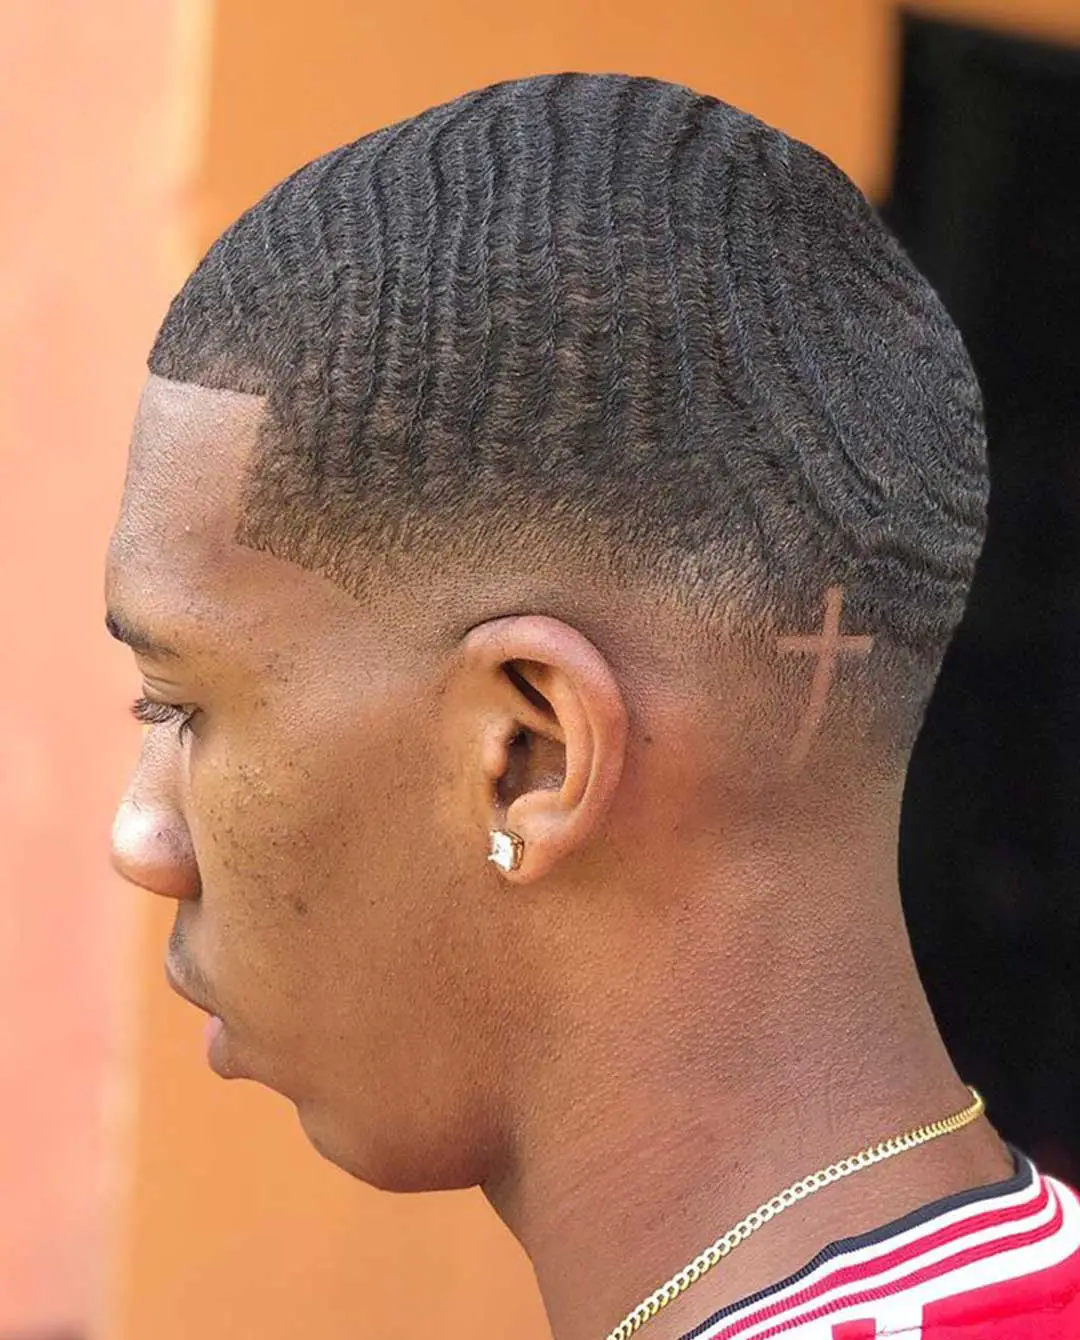 Waves Haircut with Cross Design